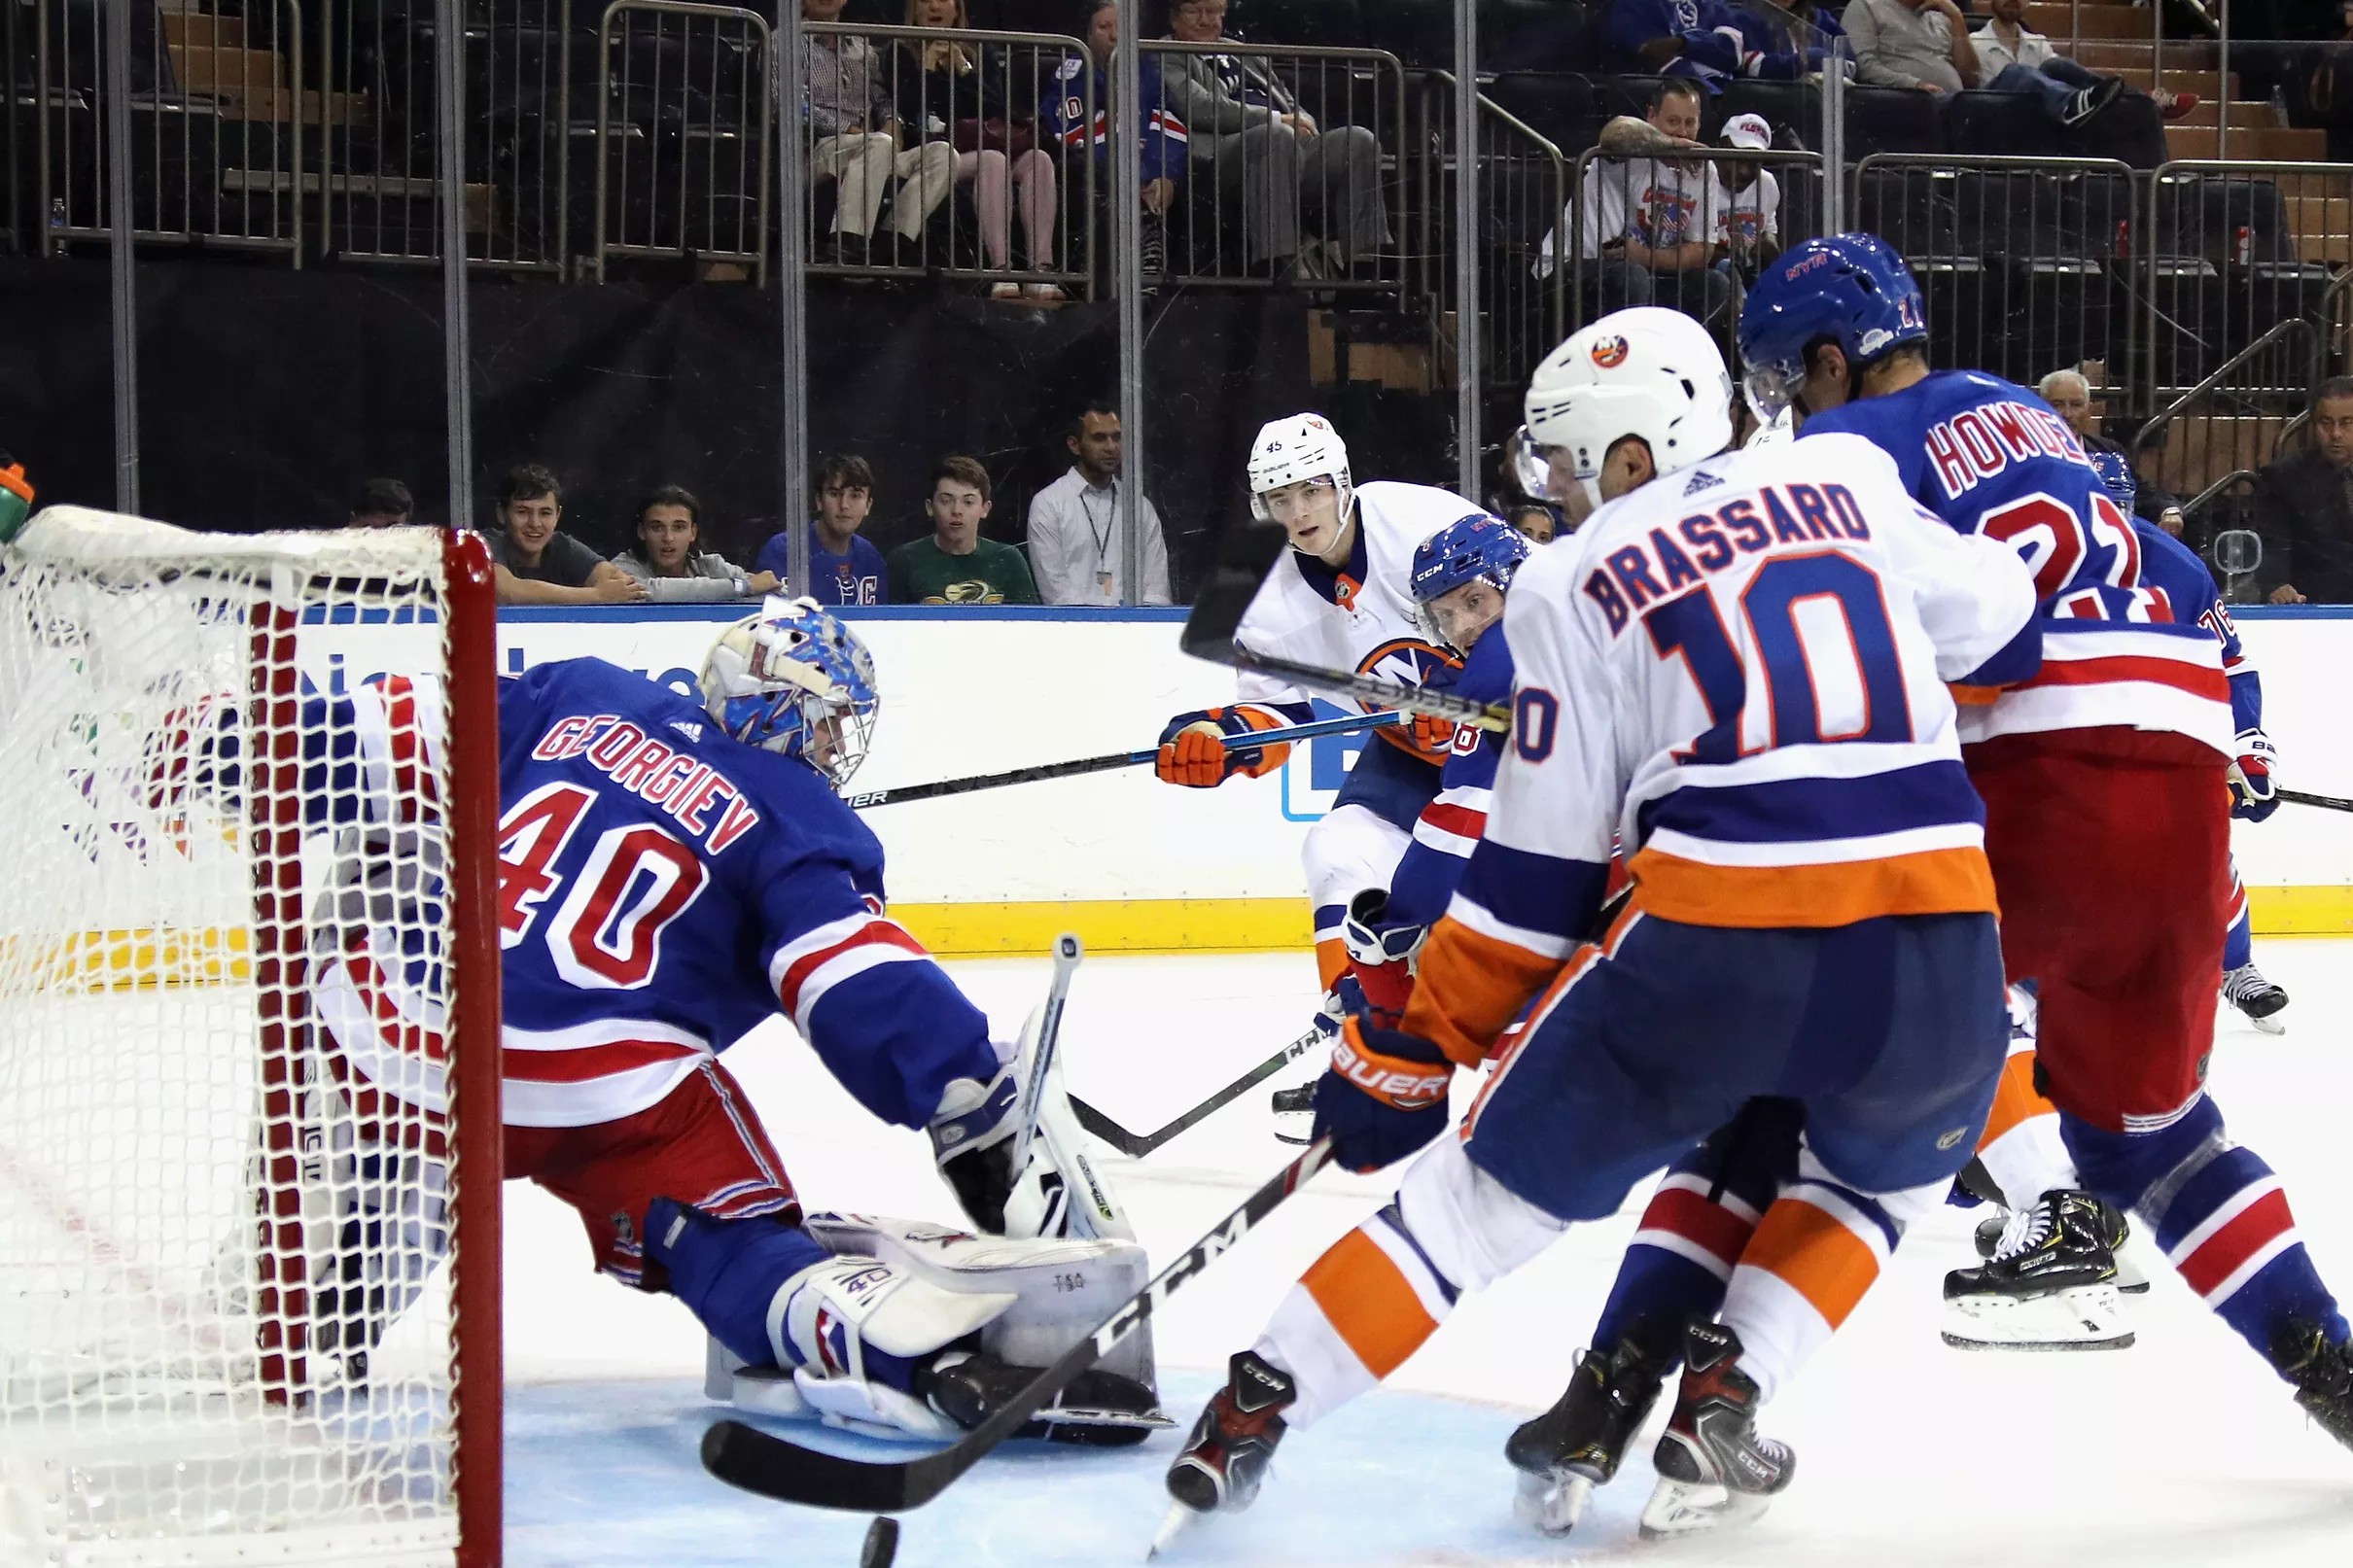 Islanders News: Roster cuts loom after loss at the Garden